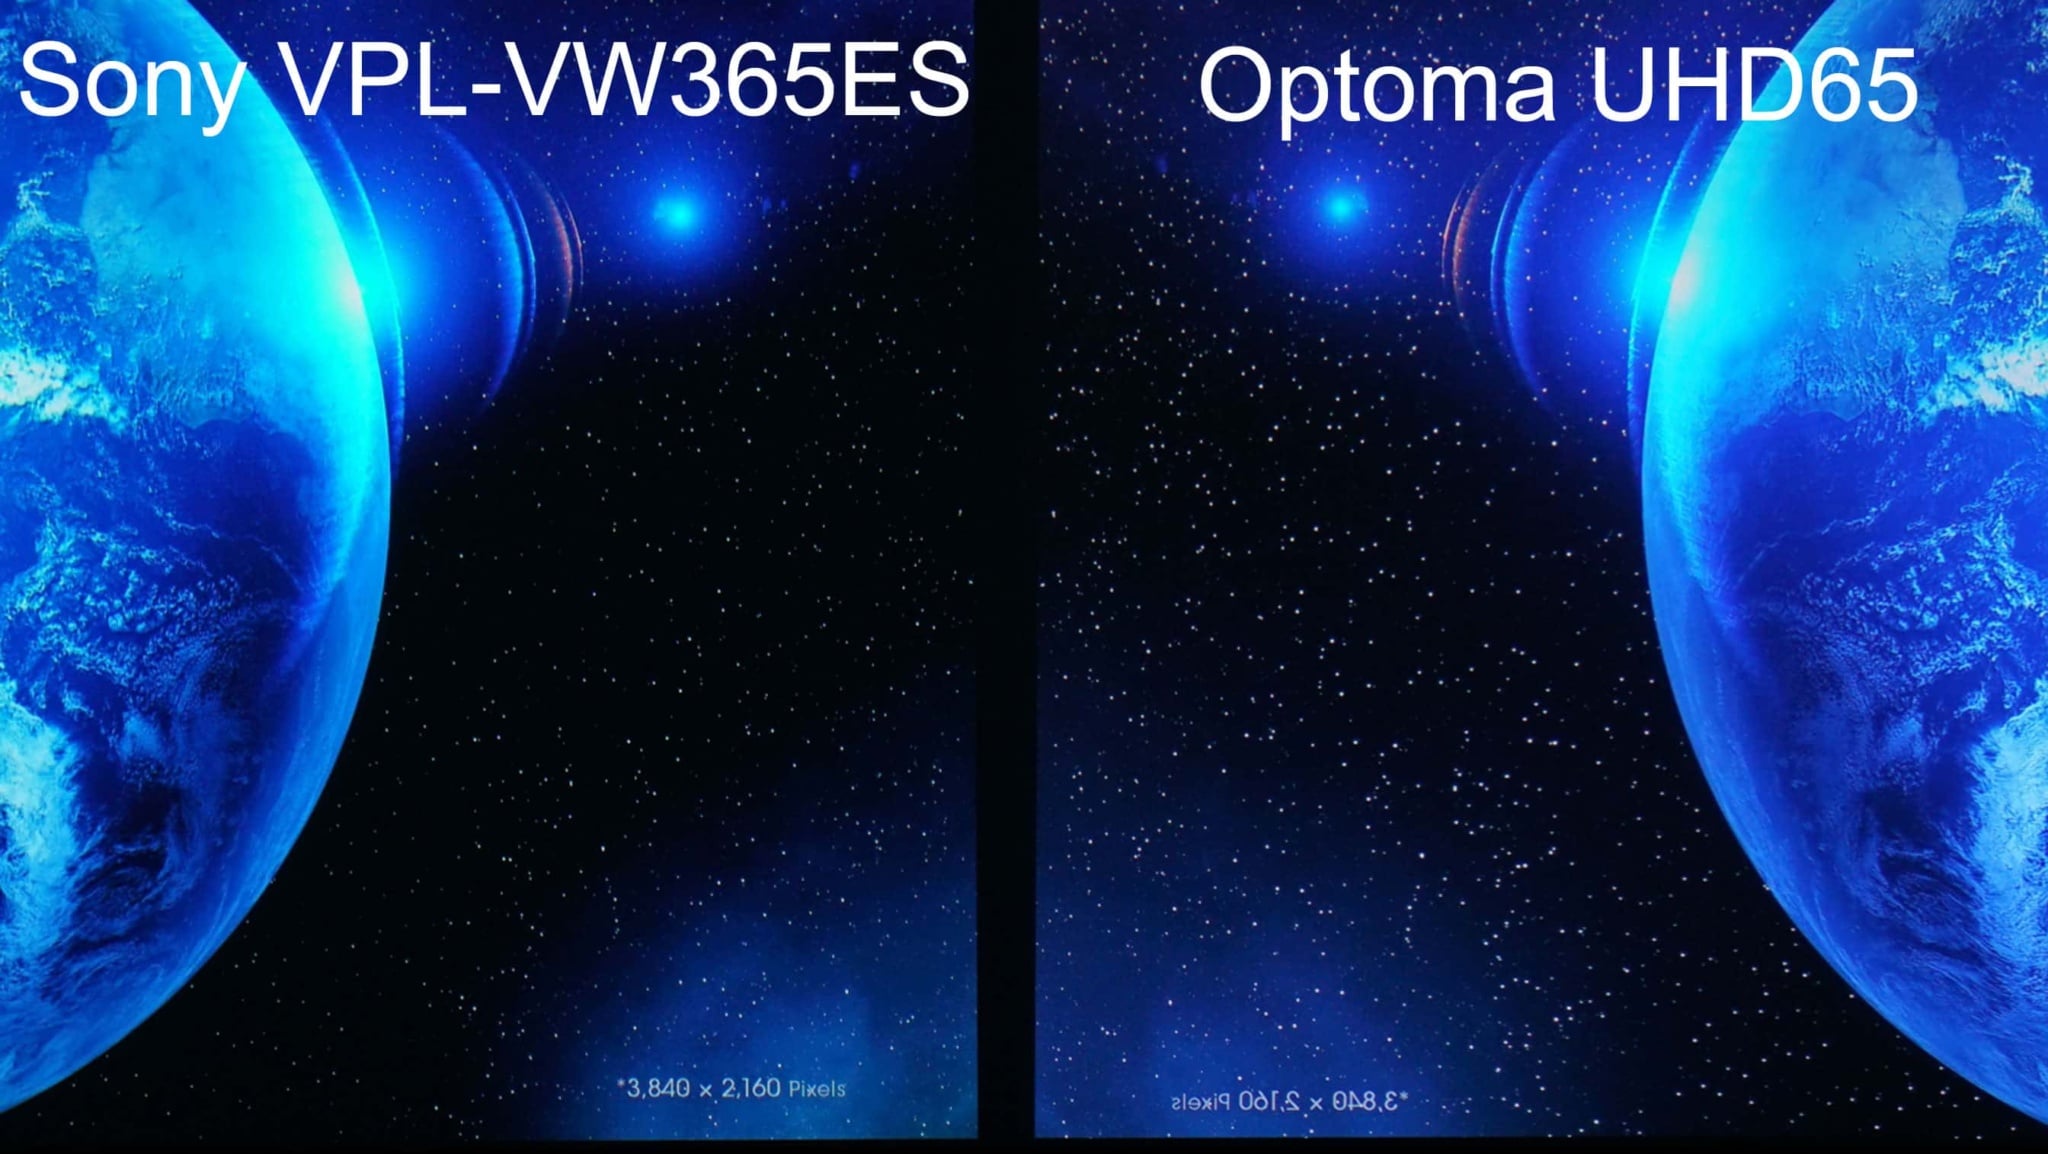 This closeup (approximately 1/4 of full 4K images) shows the key contrast differences between the Sony and Optoma.